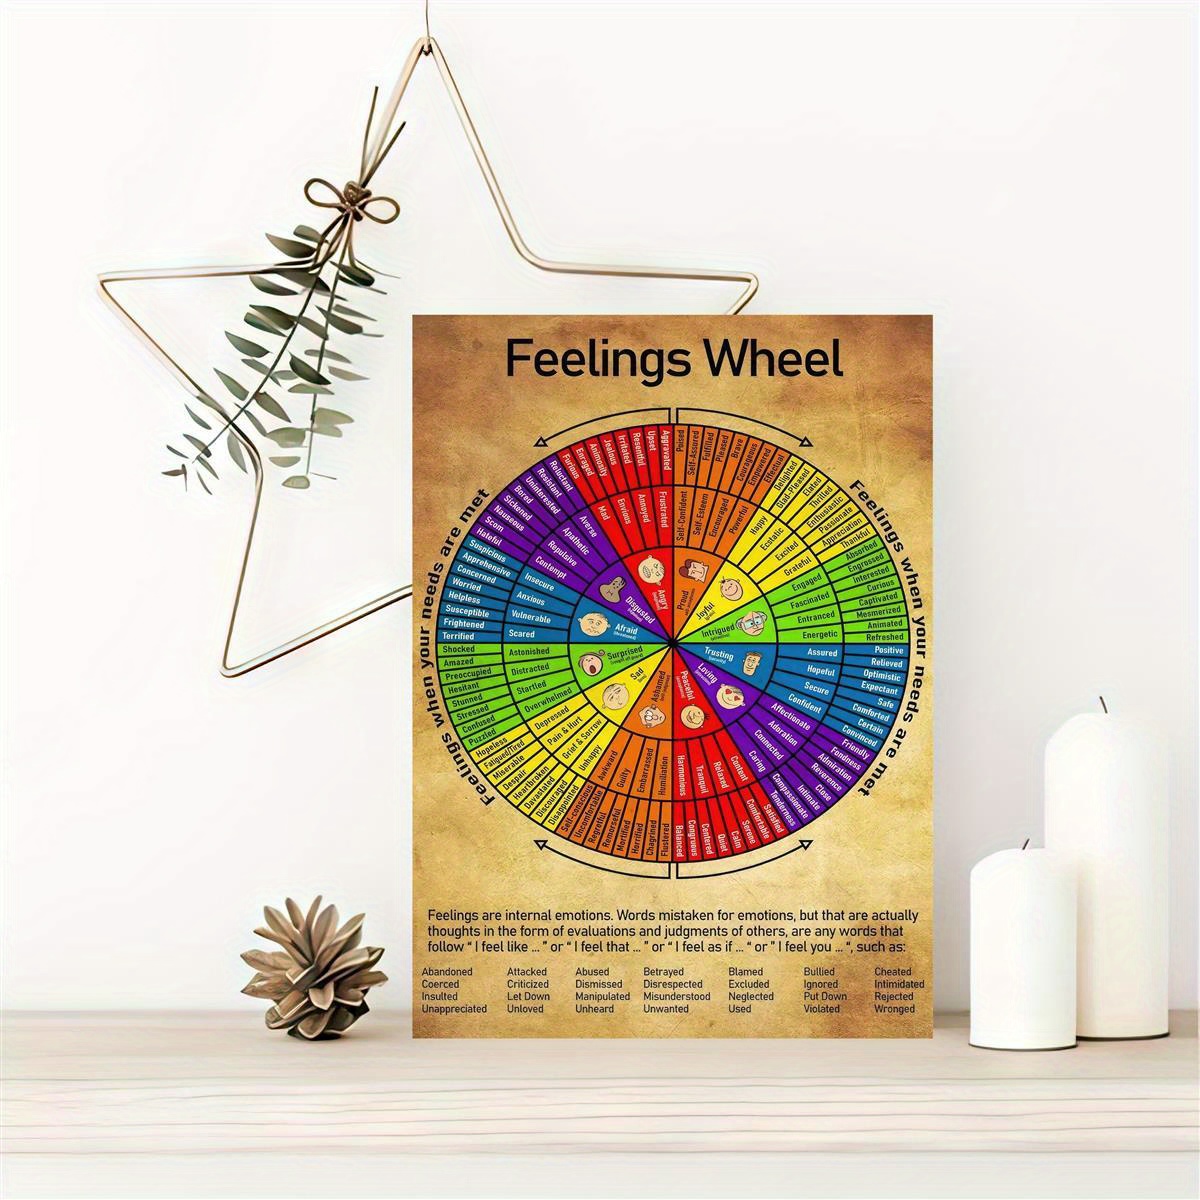  EkHou COLOR THEORY SET Color Wheel Poster Educational Poster  Classroom Decor Classroom Wall Art Poster Decorative Painting Canvas Wall  Art Posters for Room Aesthetic 08x12inch(20x30cm): Posters & Prints